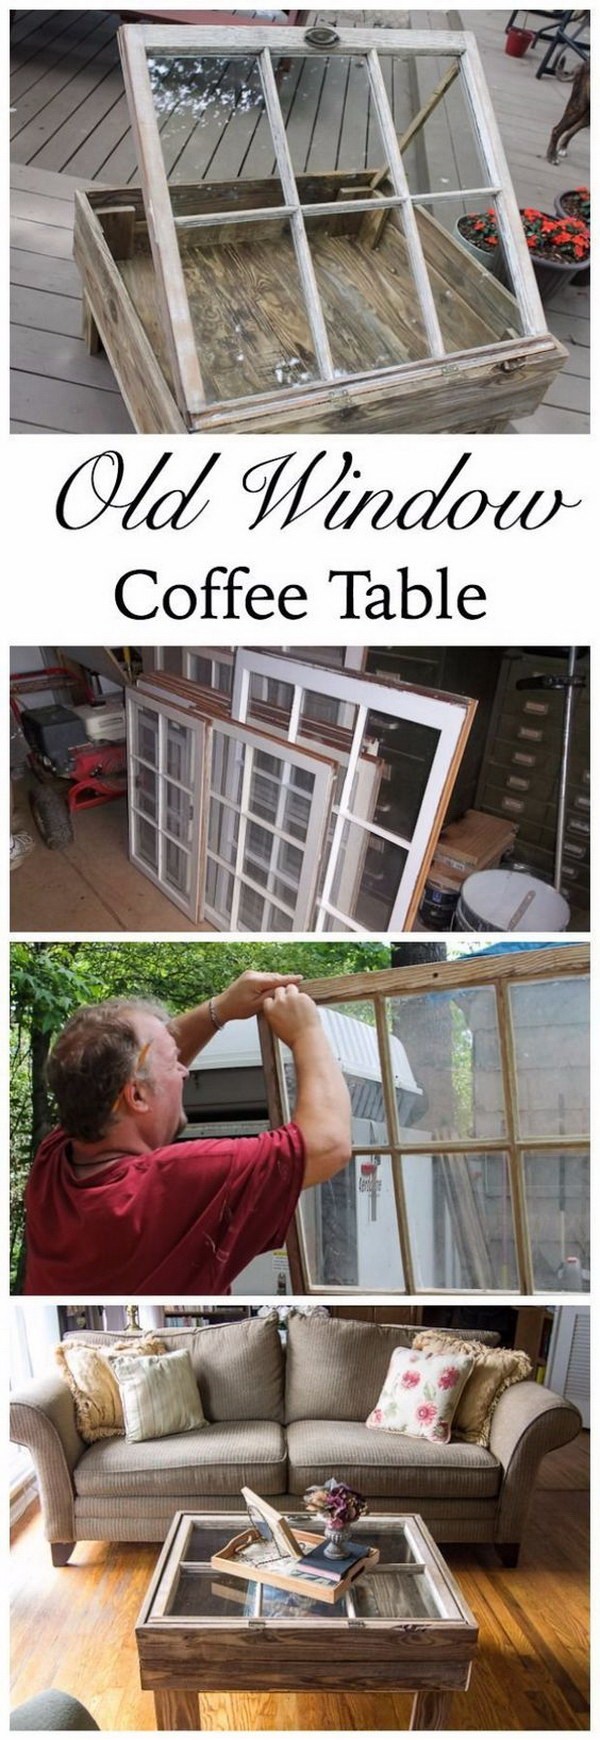 DIY Coffee Table With Old Window: 